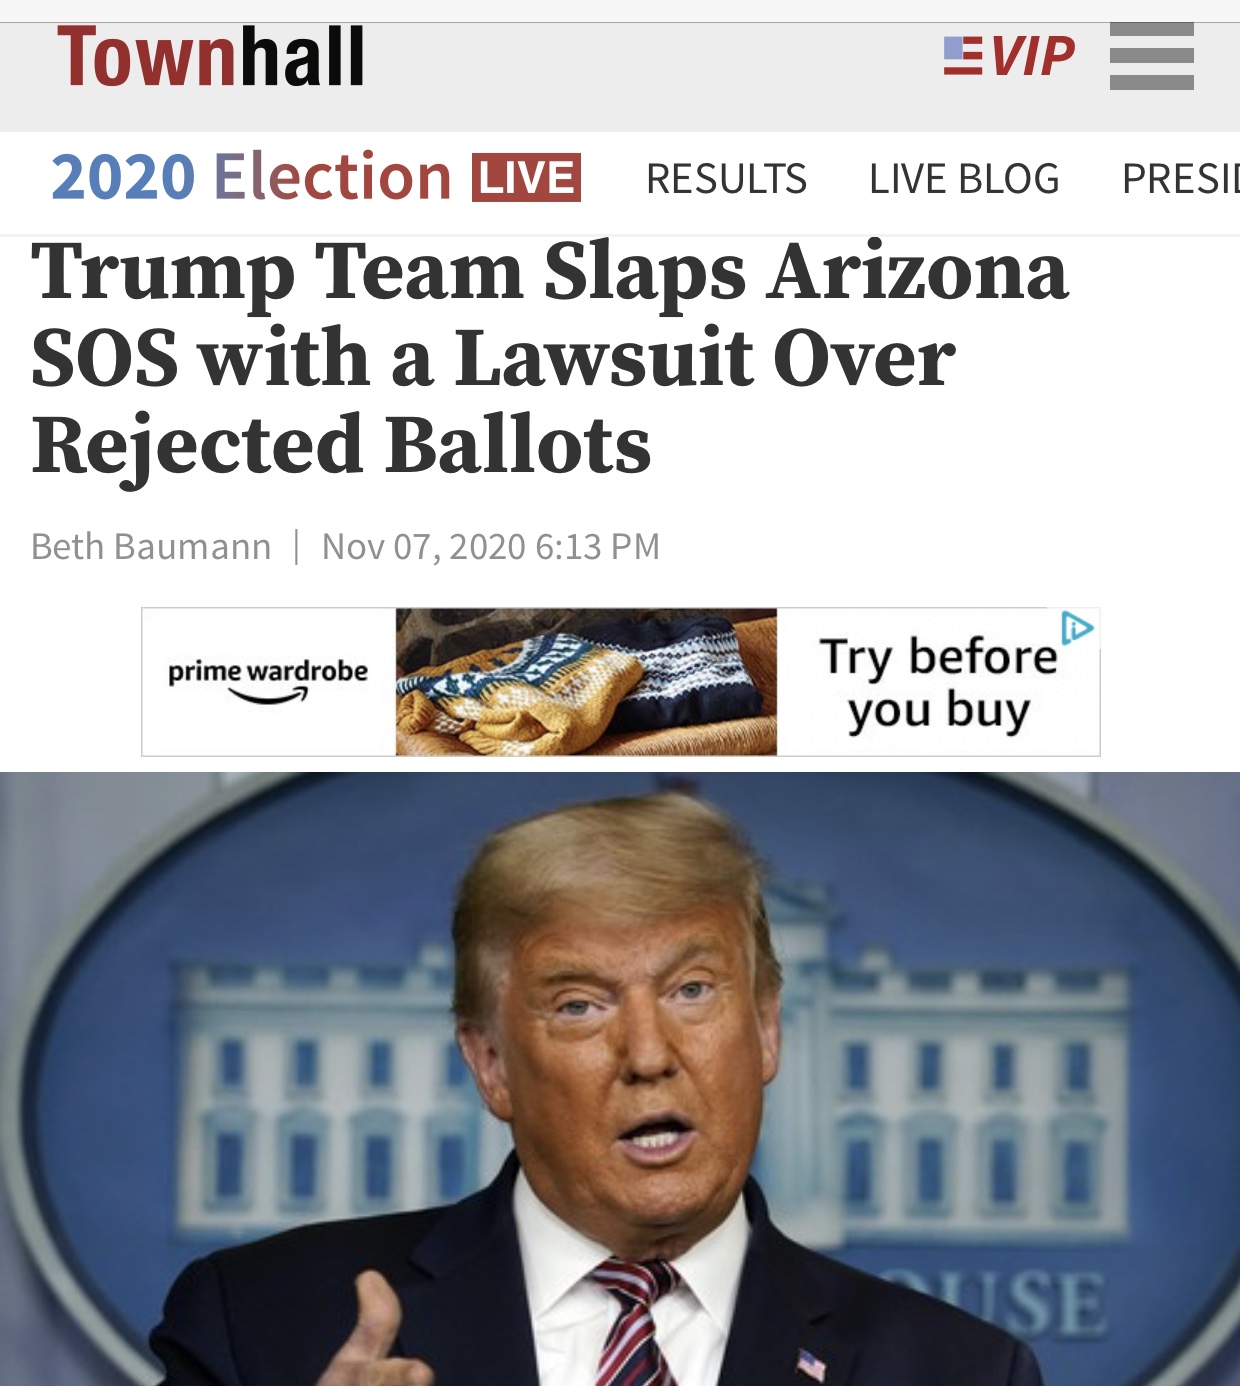 Trump Team Slaps Arizona Secretary of State with a Lawsuit Over Rejected Ballots